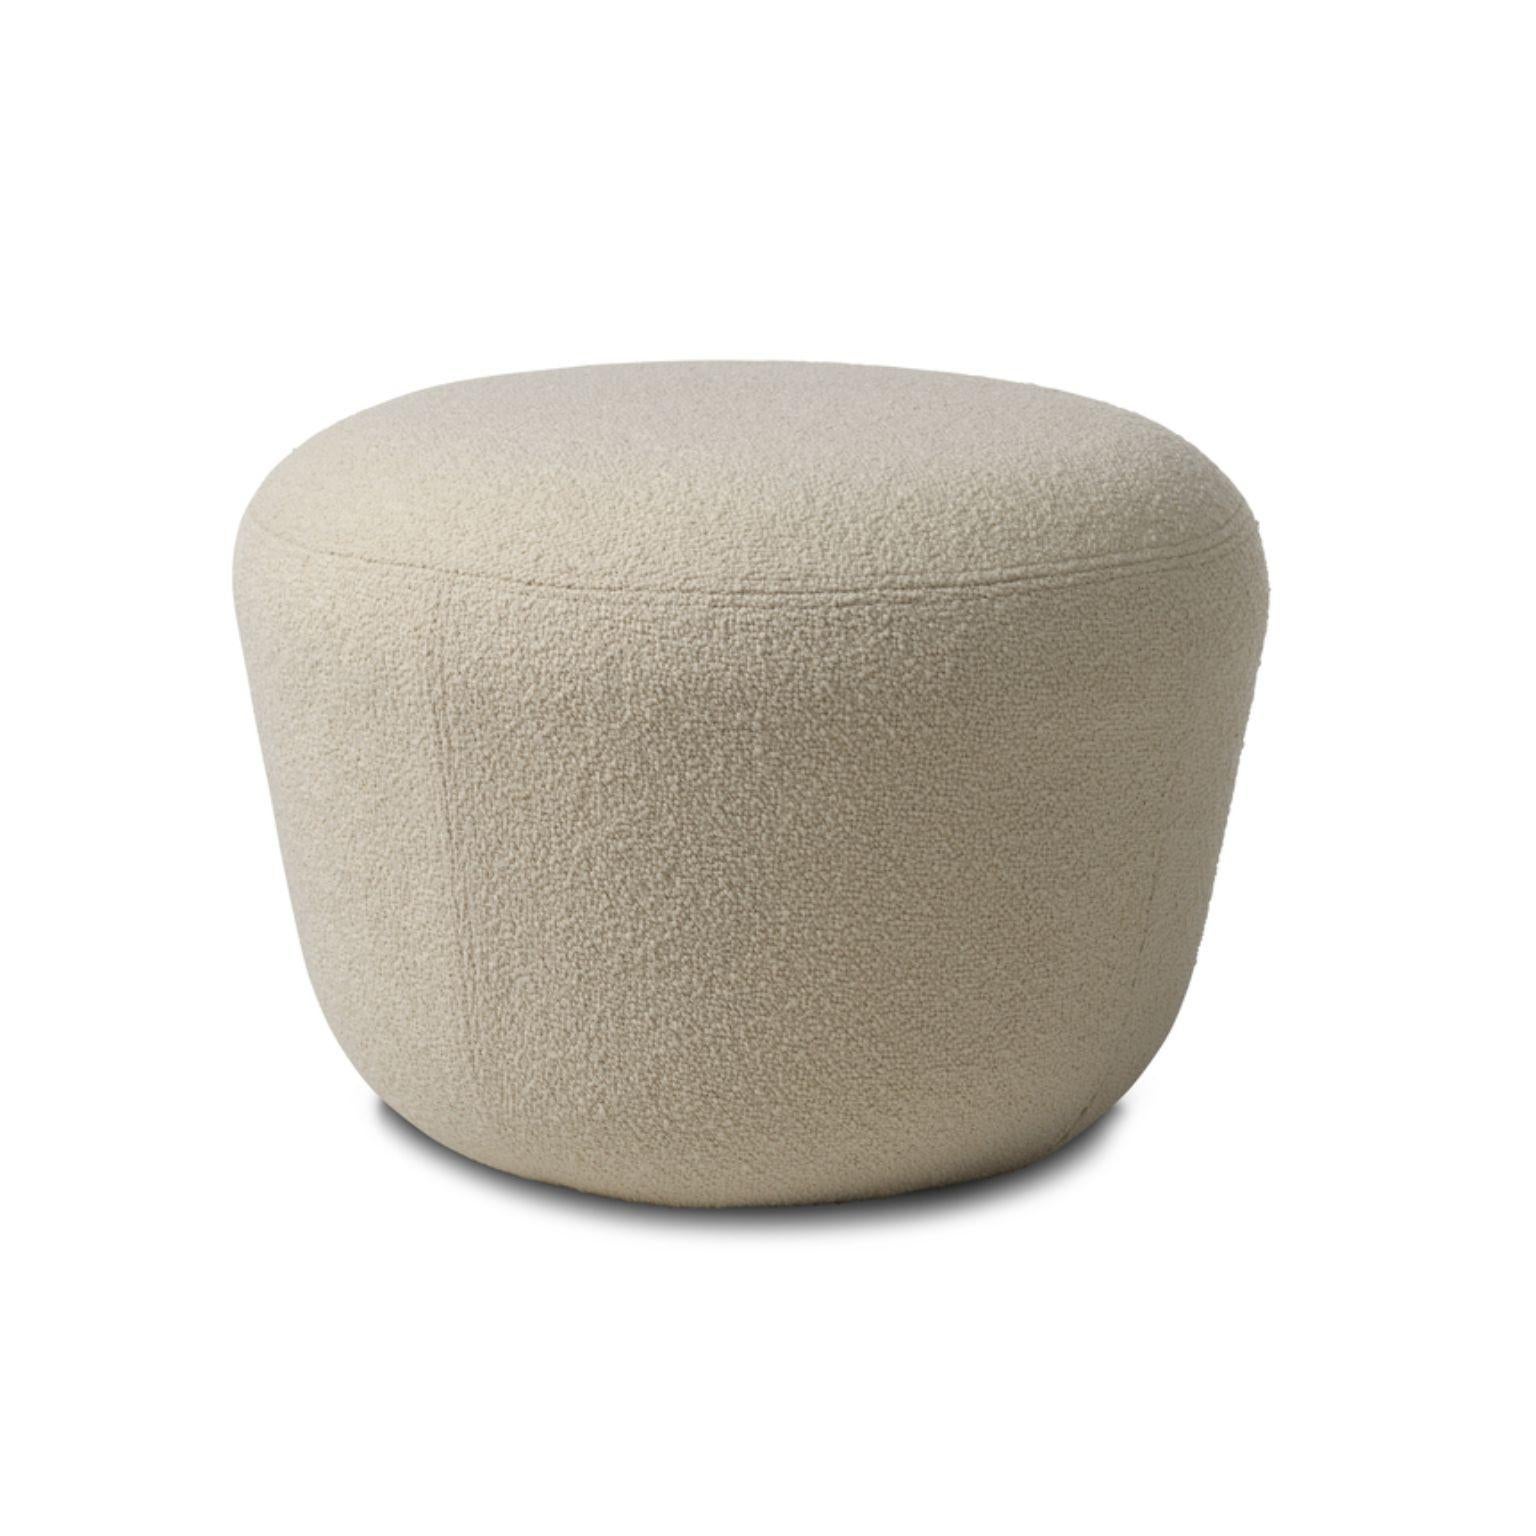 Haven Sand Pouf by Warm Nordic
Dimensions: D57 x H 40 cm
Material: Textile upholstery, Foam, Wood.
Weight: 9.5 kg
Also available in different colours and finishes. Please contact us.

The Haven Pouf is a contemporary pouf with a simple, soft